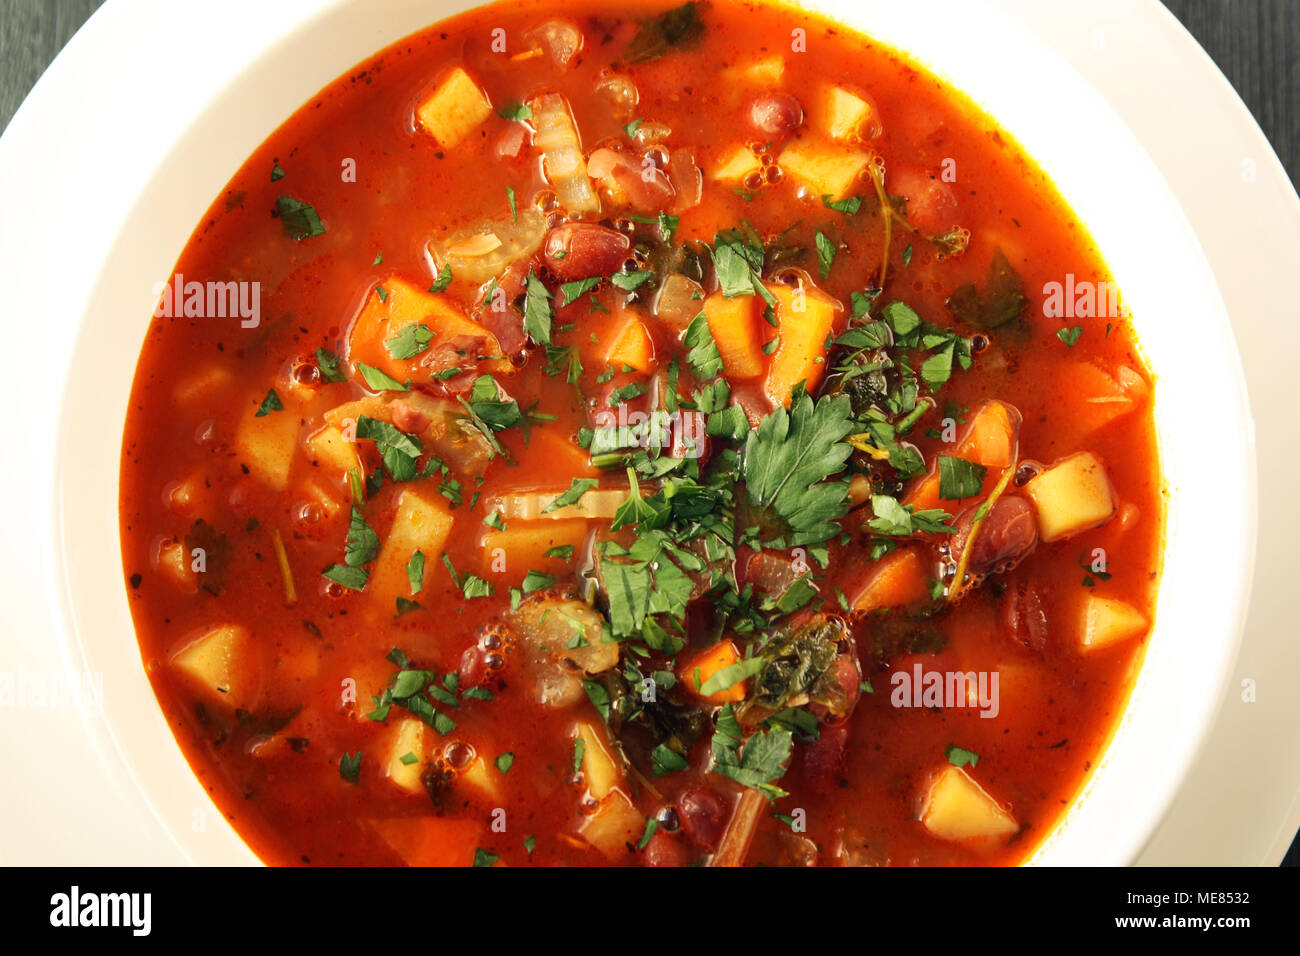 Tomato soup with red beans, potato and carrot. Vegan. European cuisine. Top view. Vegetarian dish. Main course. Colorful photo. Stock Photo